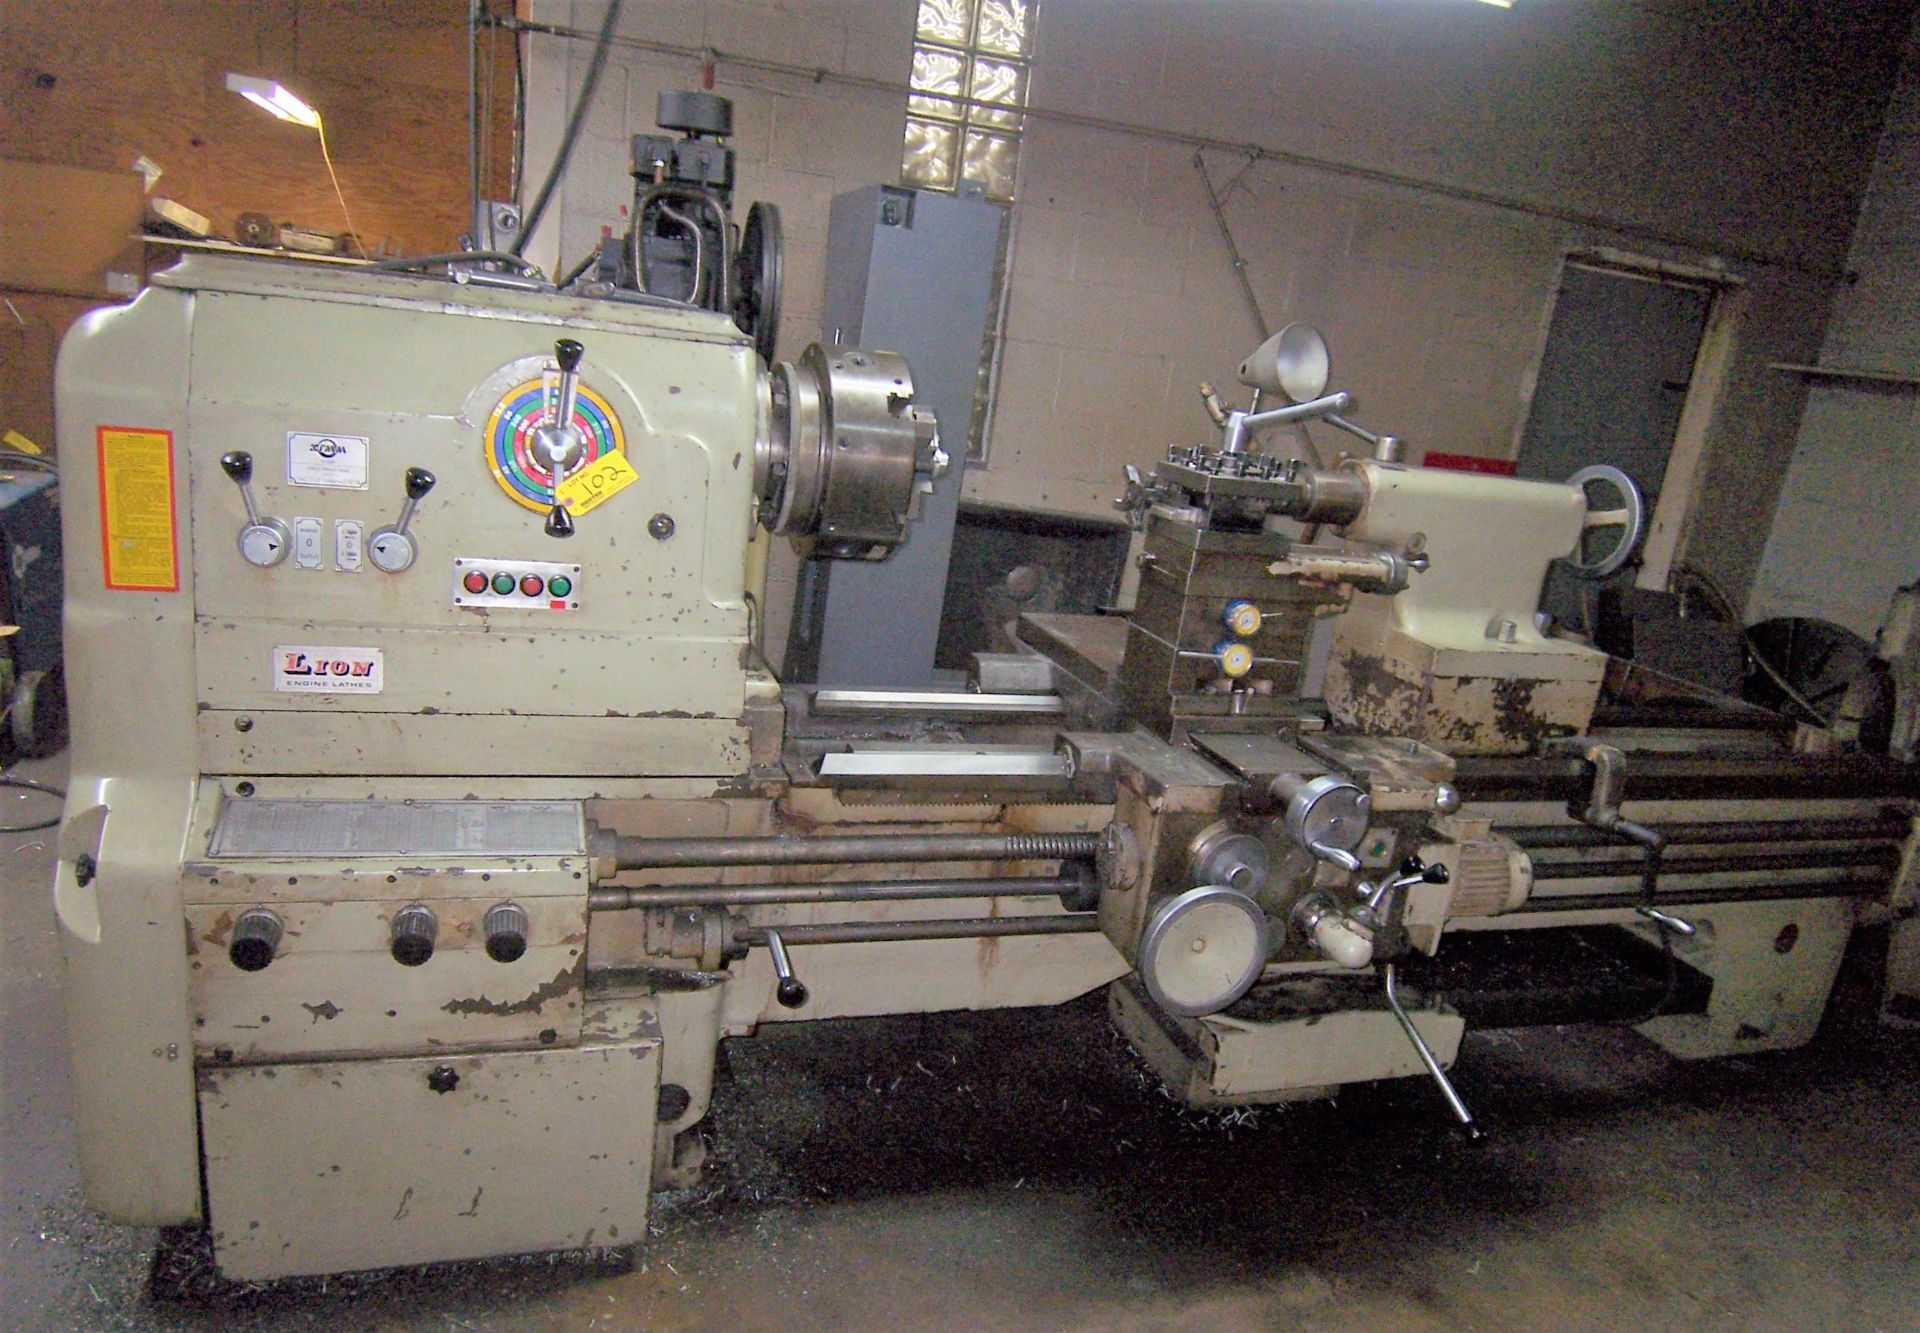 38"/44" X 87" LION GNP BED LATHE WITH 4-1/8" HOLD THRU SPINDLE, SPINDLE SPEEDS 8-1000 RPM, INCH/